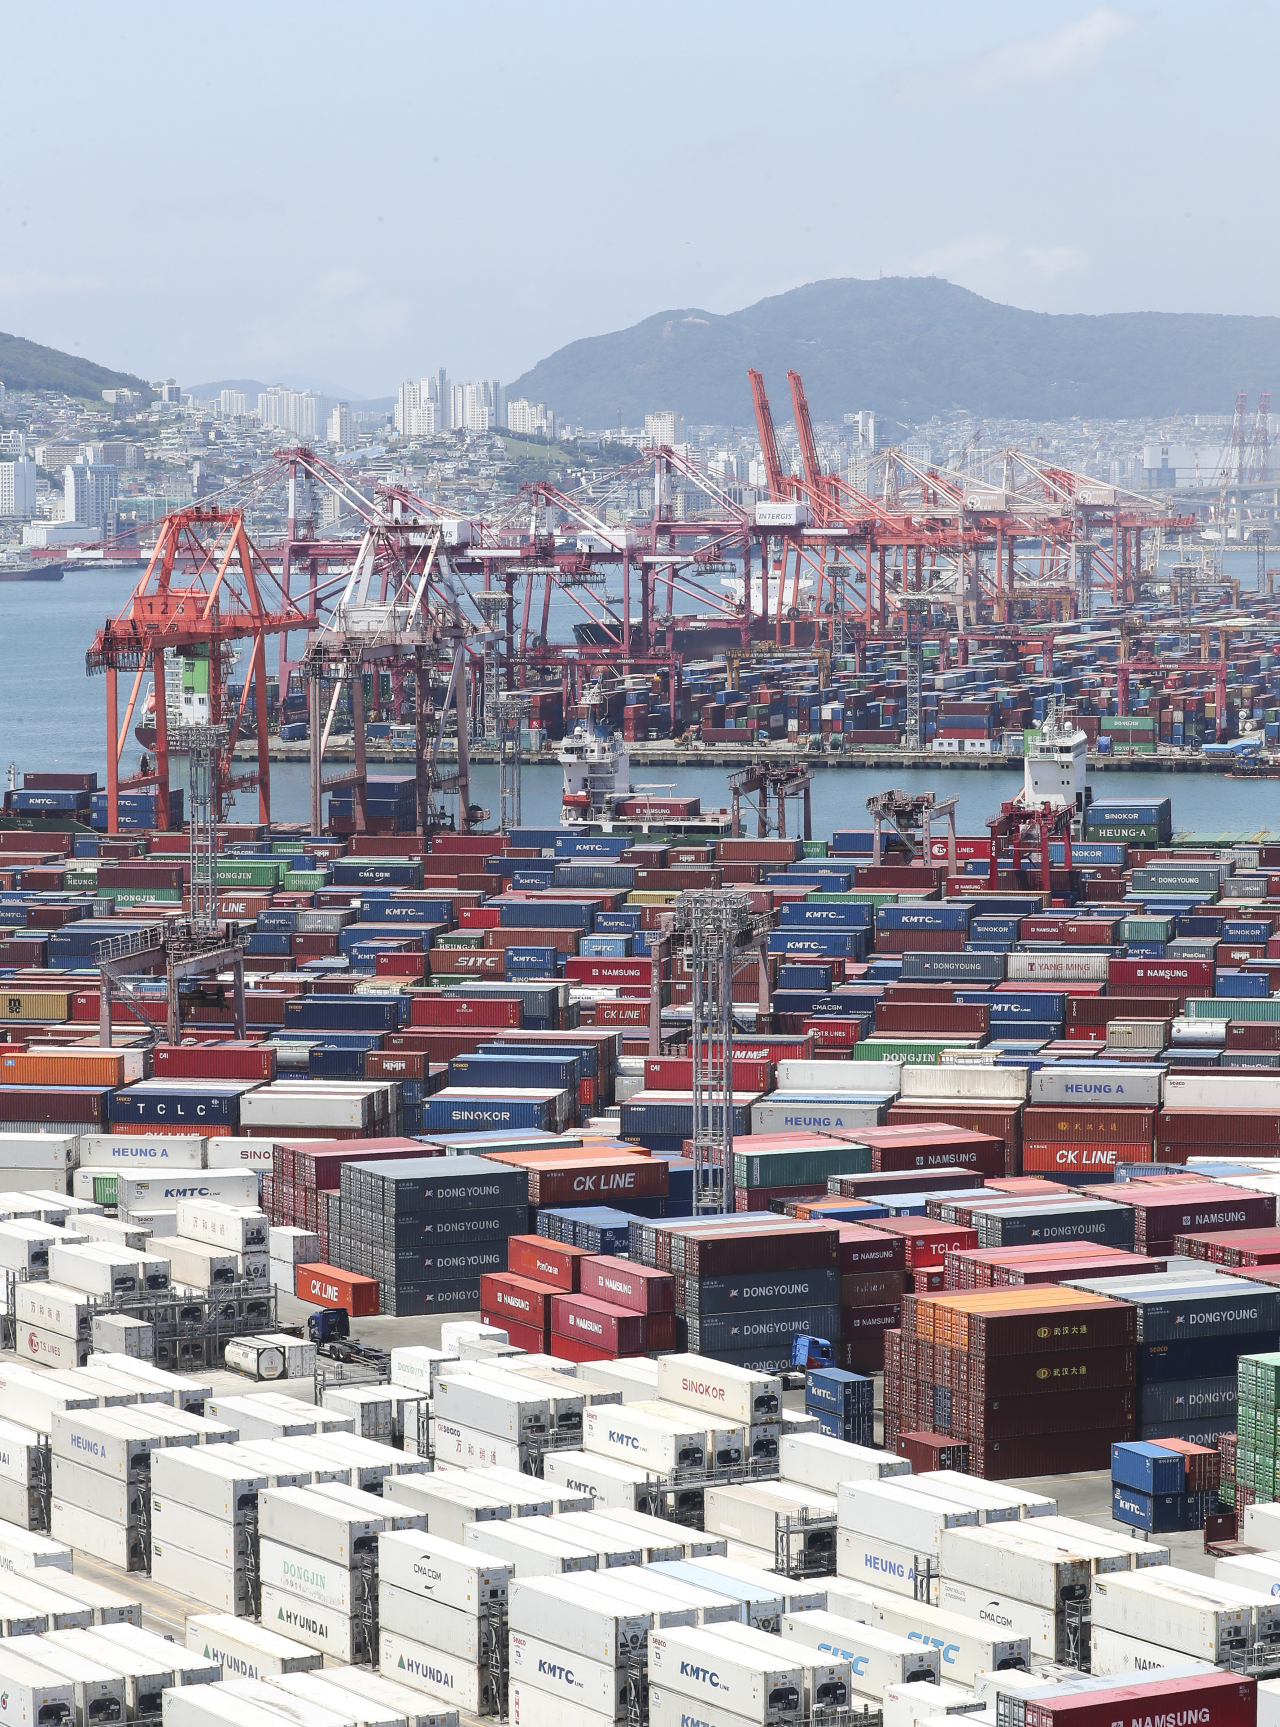 Containers for exports and imports are stacked at a pier in South Korea's largest port city of Busan last Friday. South Korea logged a trade deficit of $10.3 billion in the January-June period, the highest figure for any first-half period, due to high global energy prices, according to data from the Ministry of Trade, Industry and Energy. (Yonhap)